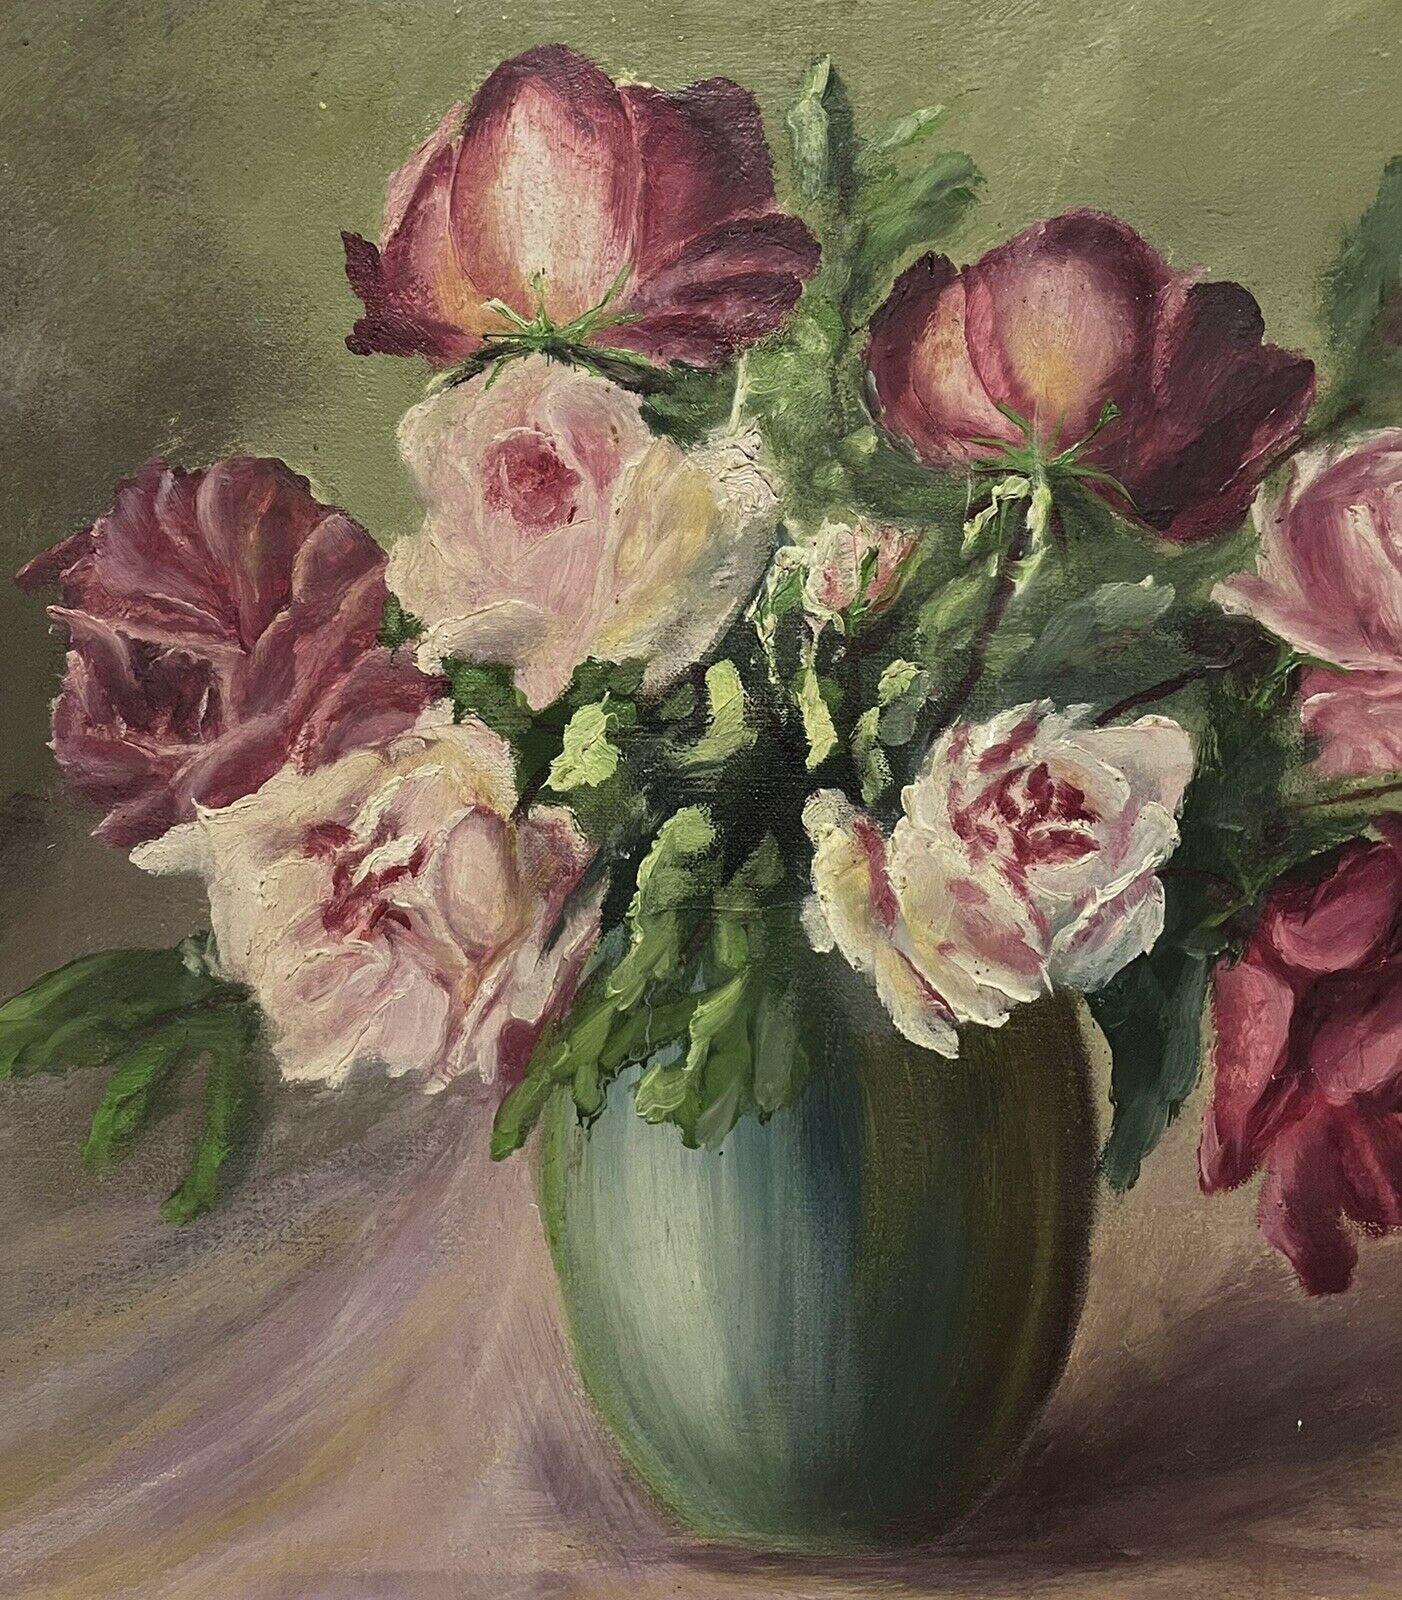 Artist/ School: French School, mid 20th century, signed

Title: pink roses in vase

Medium: oil painting on canvas, framed, signed.

Size:     framed: 20.25 x 23.5 
           painting: 15 x 18 inches
               depth:  3.5 inches

Provenance: